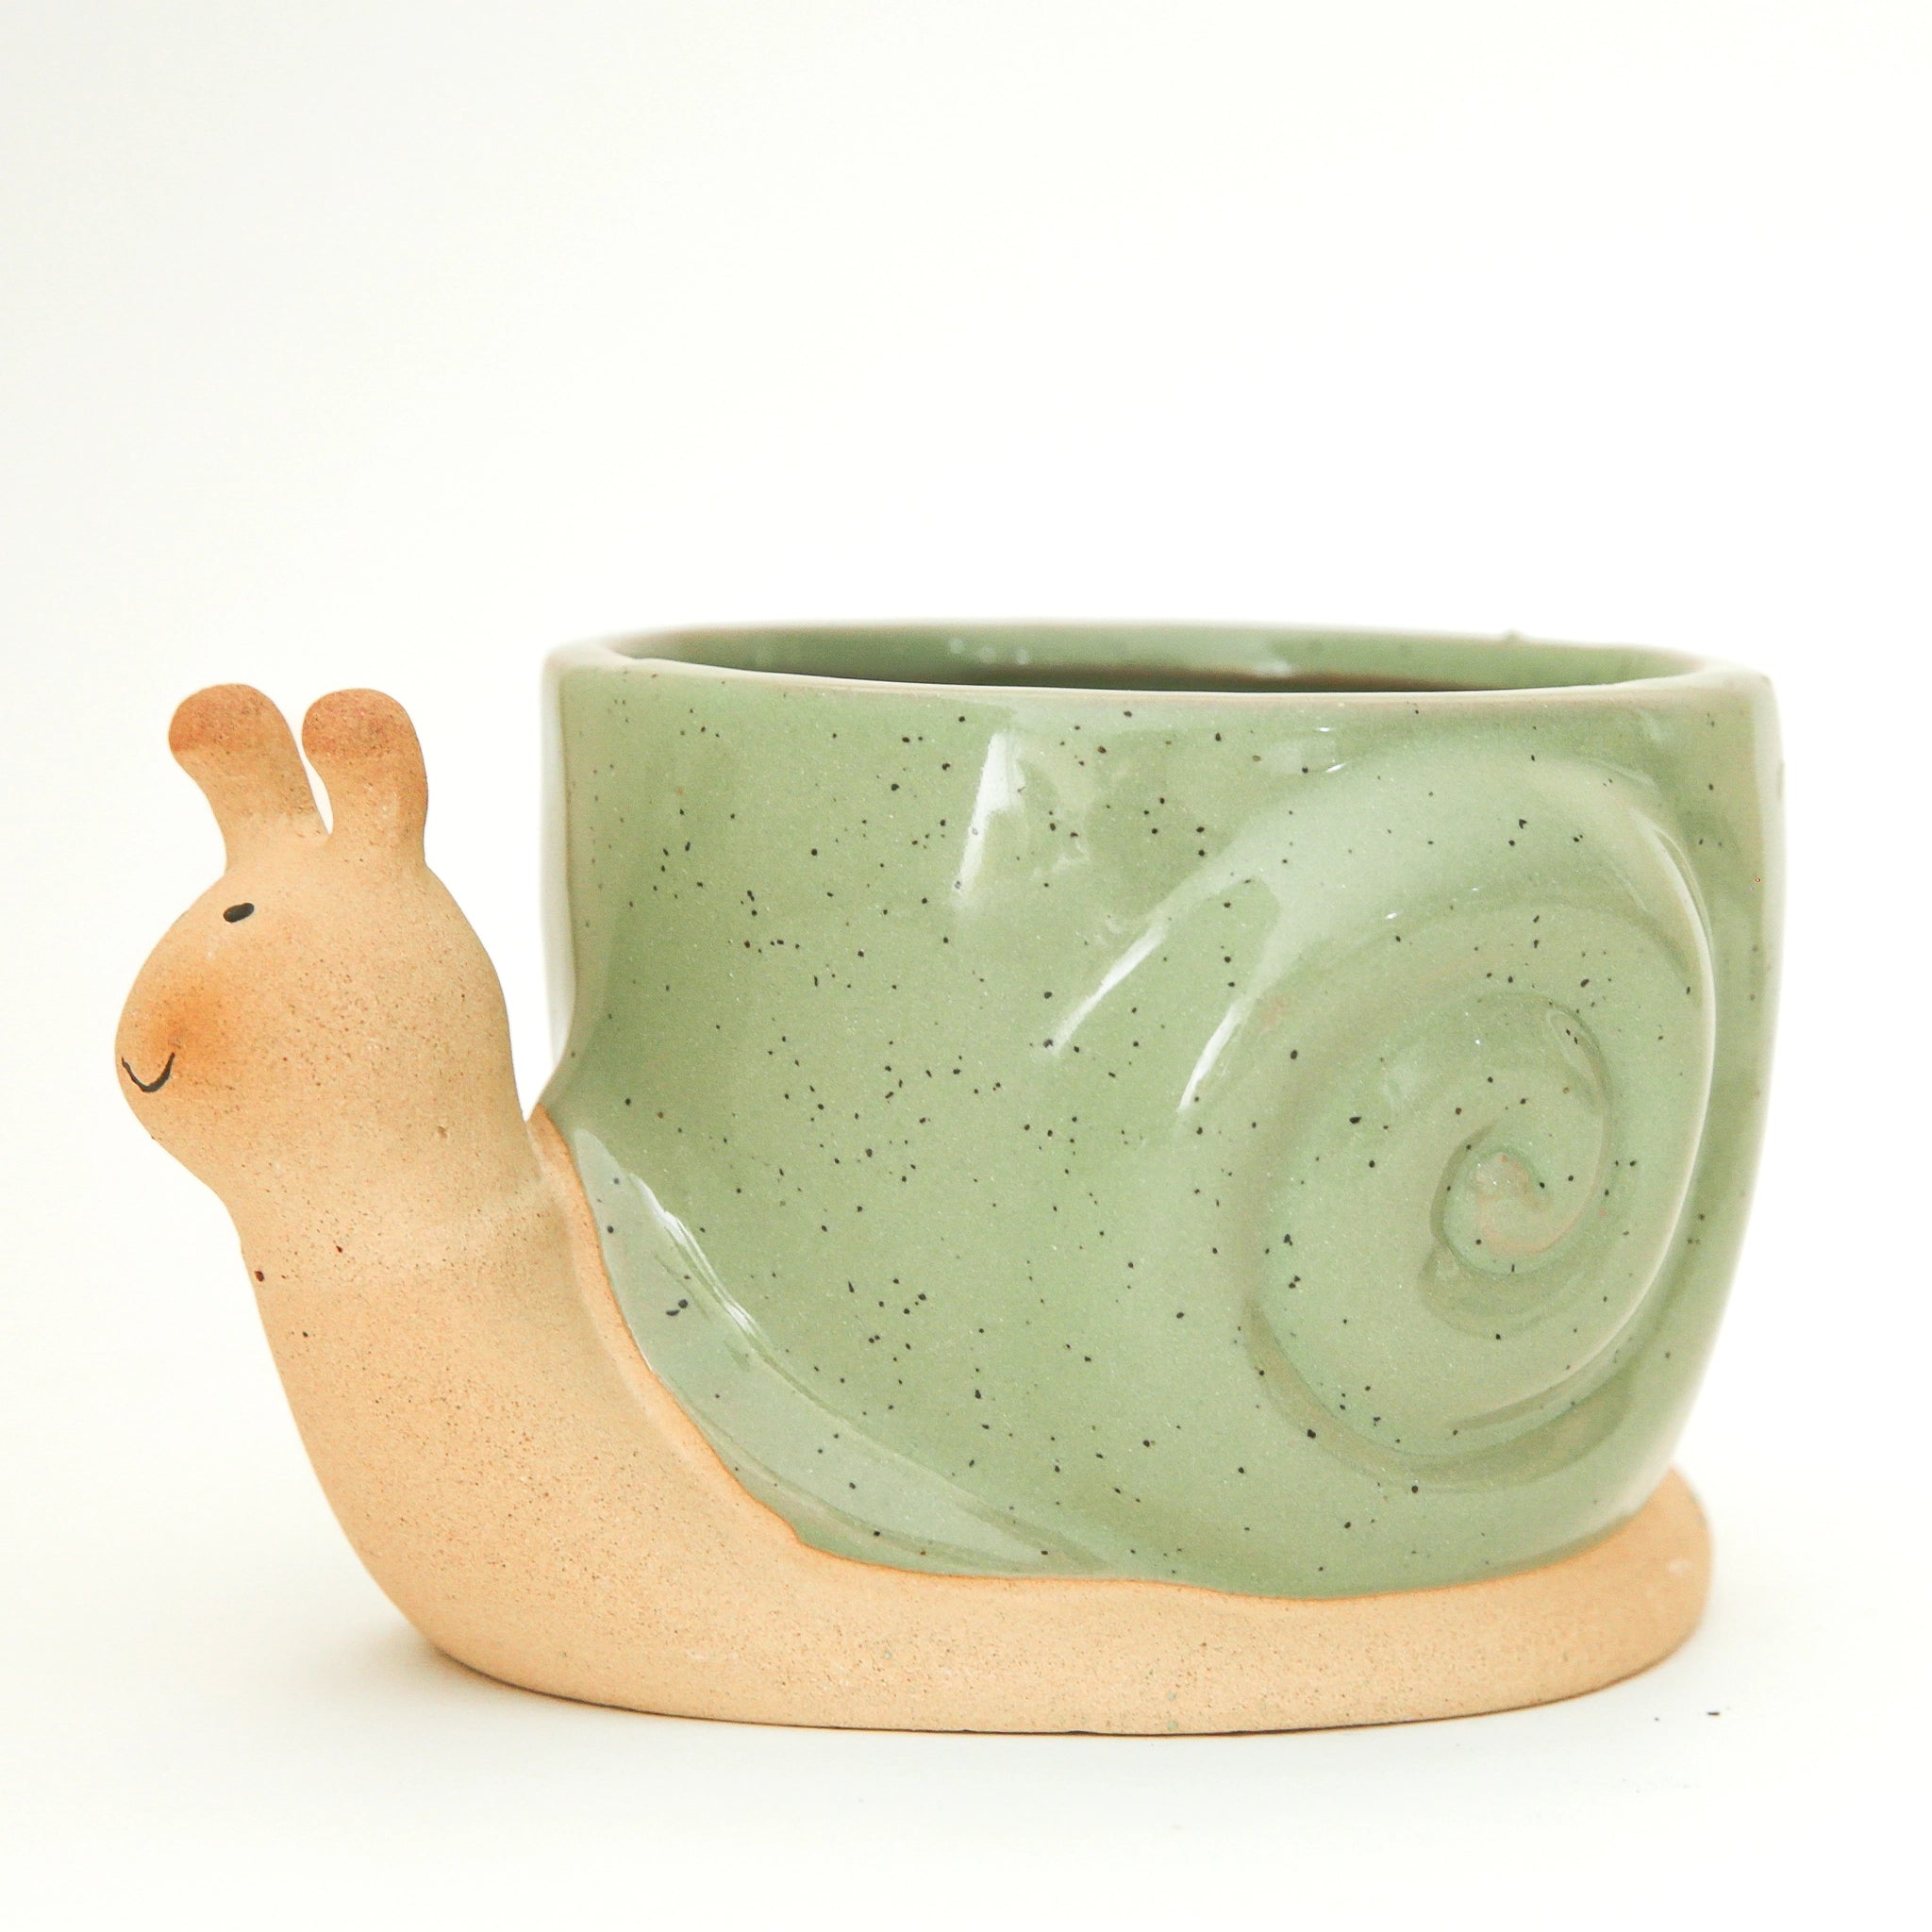 On a tan background is a ceramic planter in the shape of a snail with smiling face and a swirly green &quot;shell&quot;.